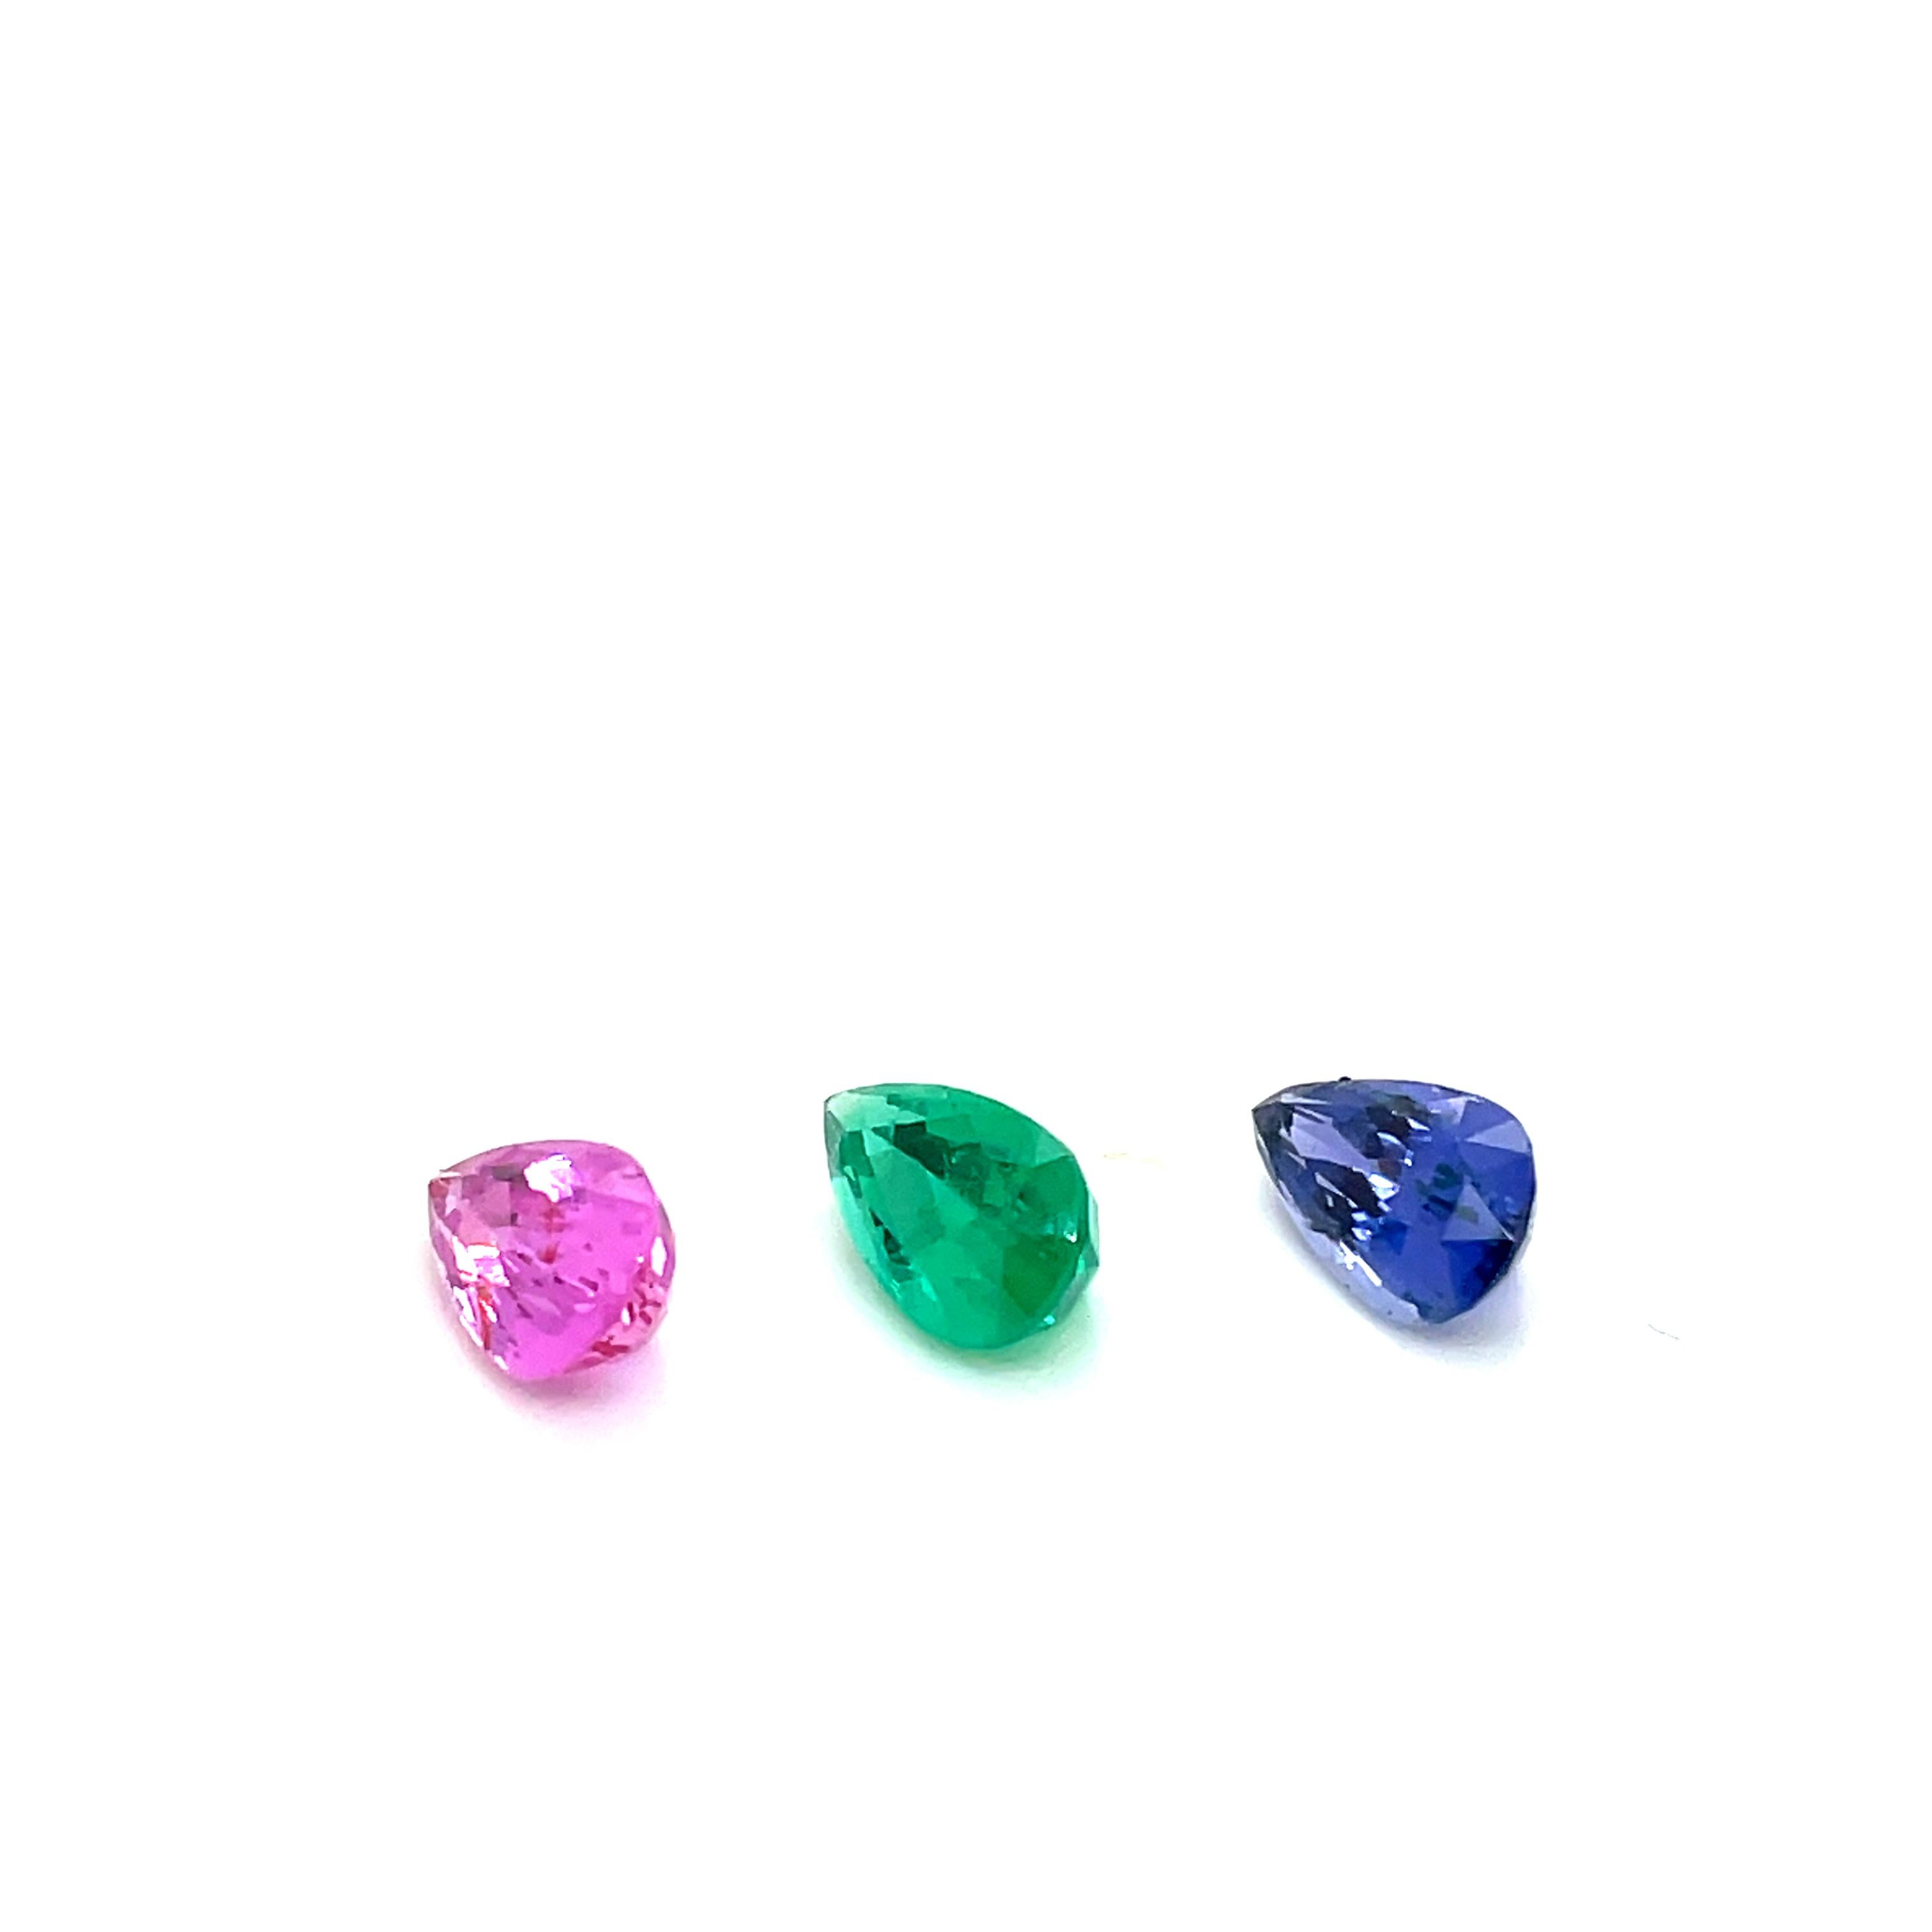 Women's Natural Blue Sapphire Pear and Pink Sapphire Pear & Emerald Pear Loose Gemstones For Sale